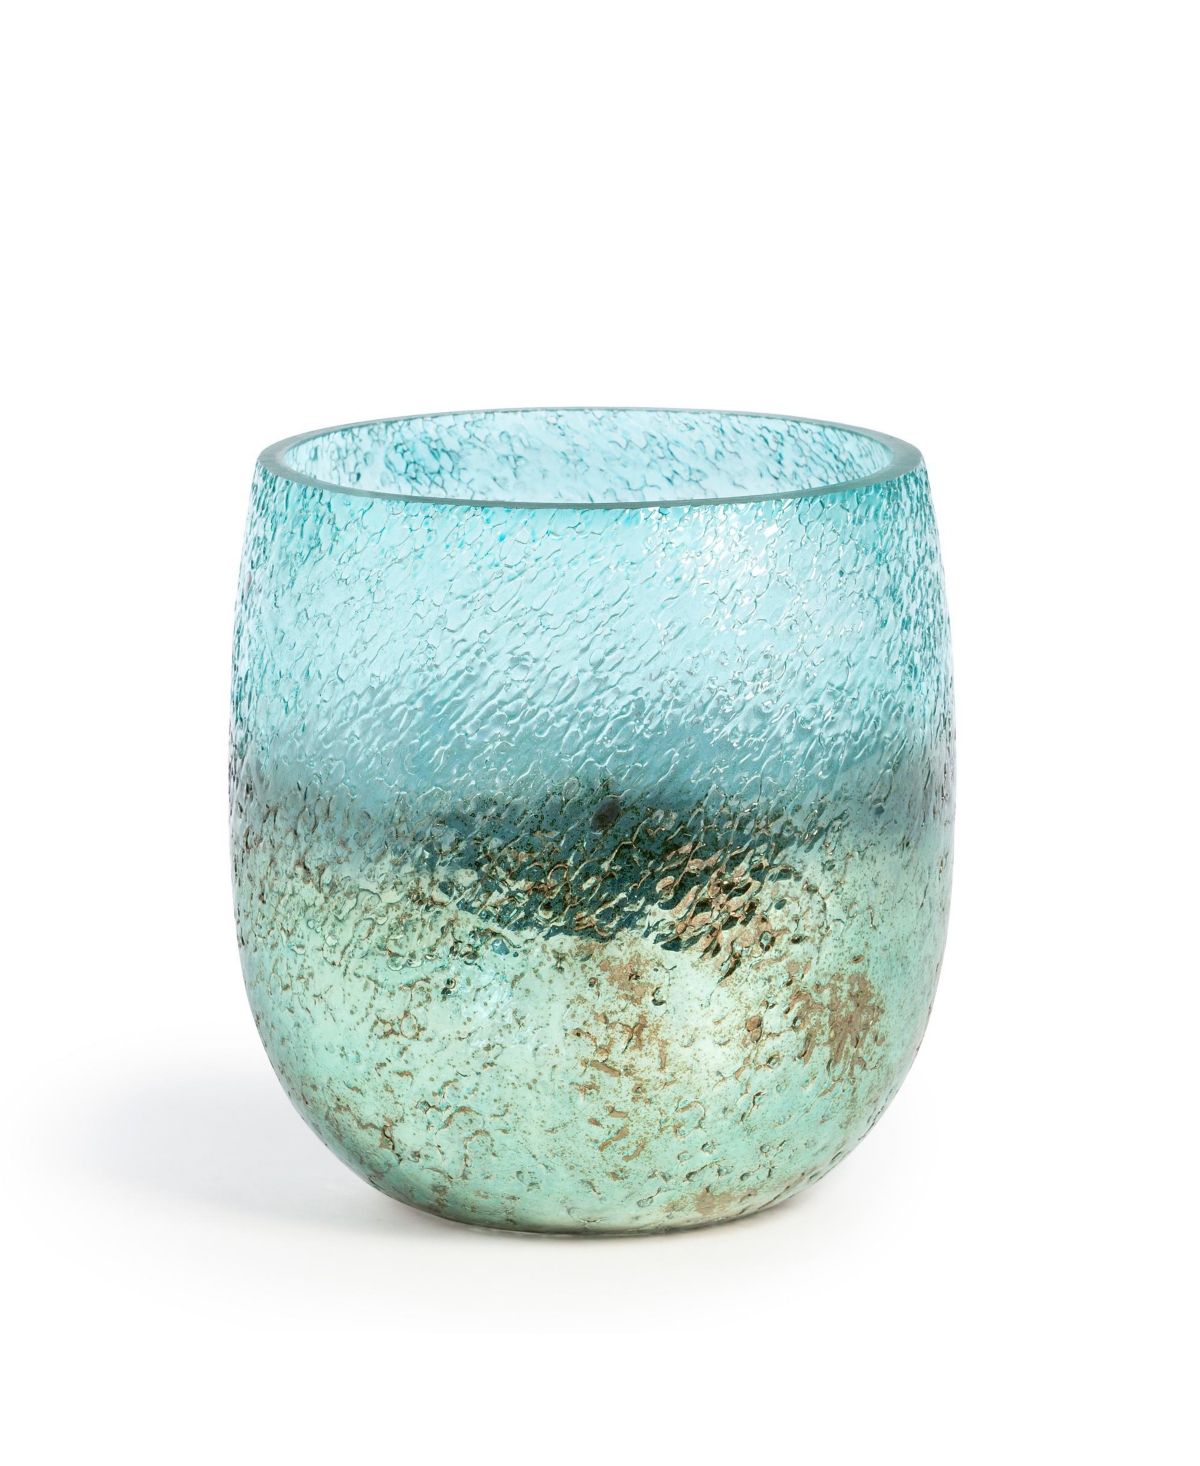 Park Hill Collection Seaside Glass Vase In Turquoise/aqua